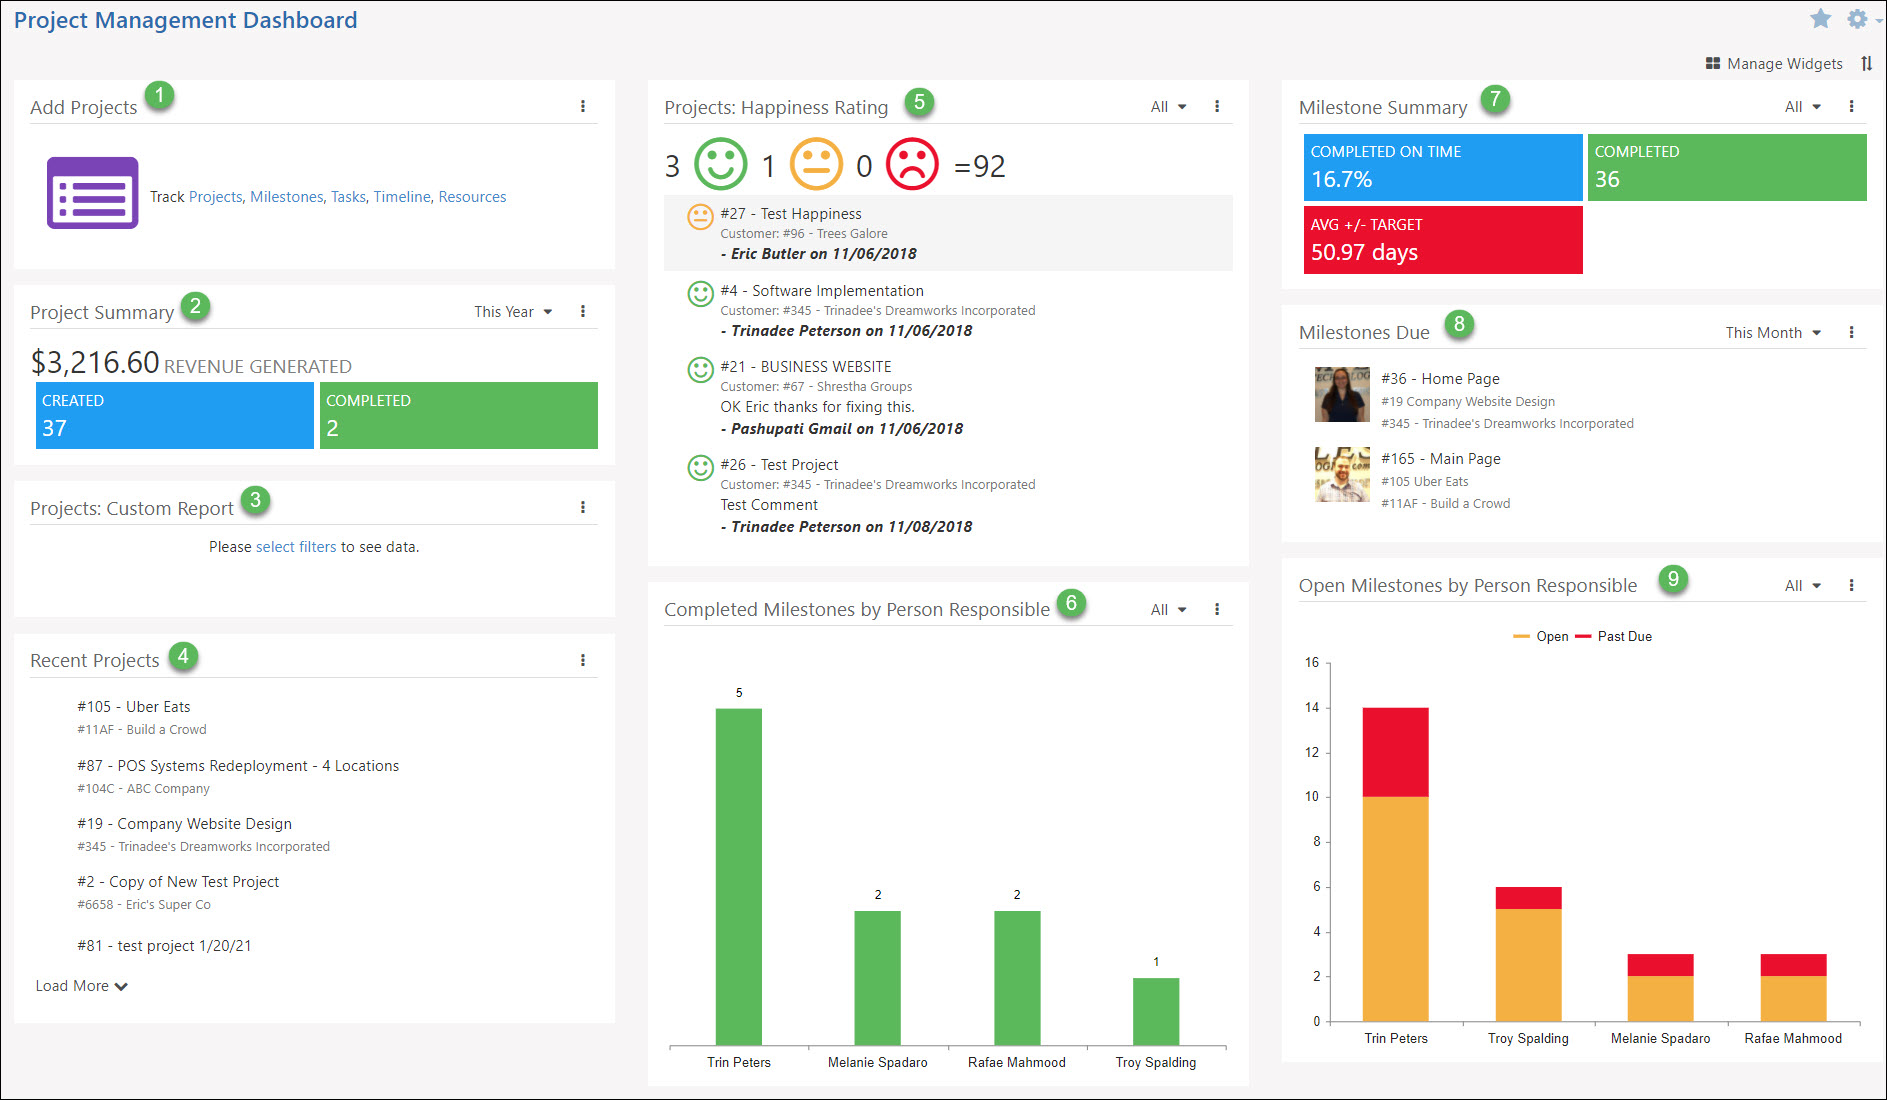 Project Management Dashboard with widgets for add projects, project summary, projects custom reports, recent projects, projects happiness rating, completed milestones by person responsible, milestone summary, milestones due, and open milestones by person responsible